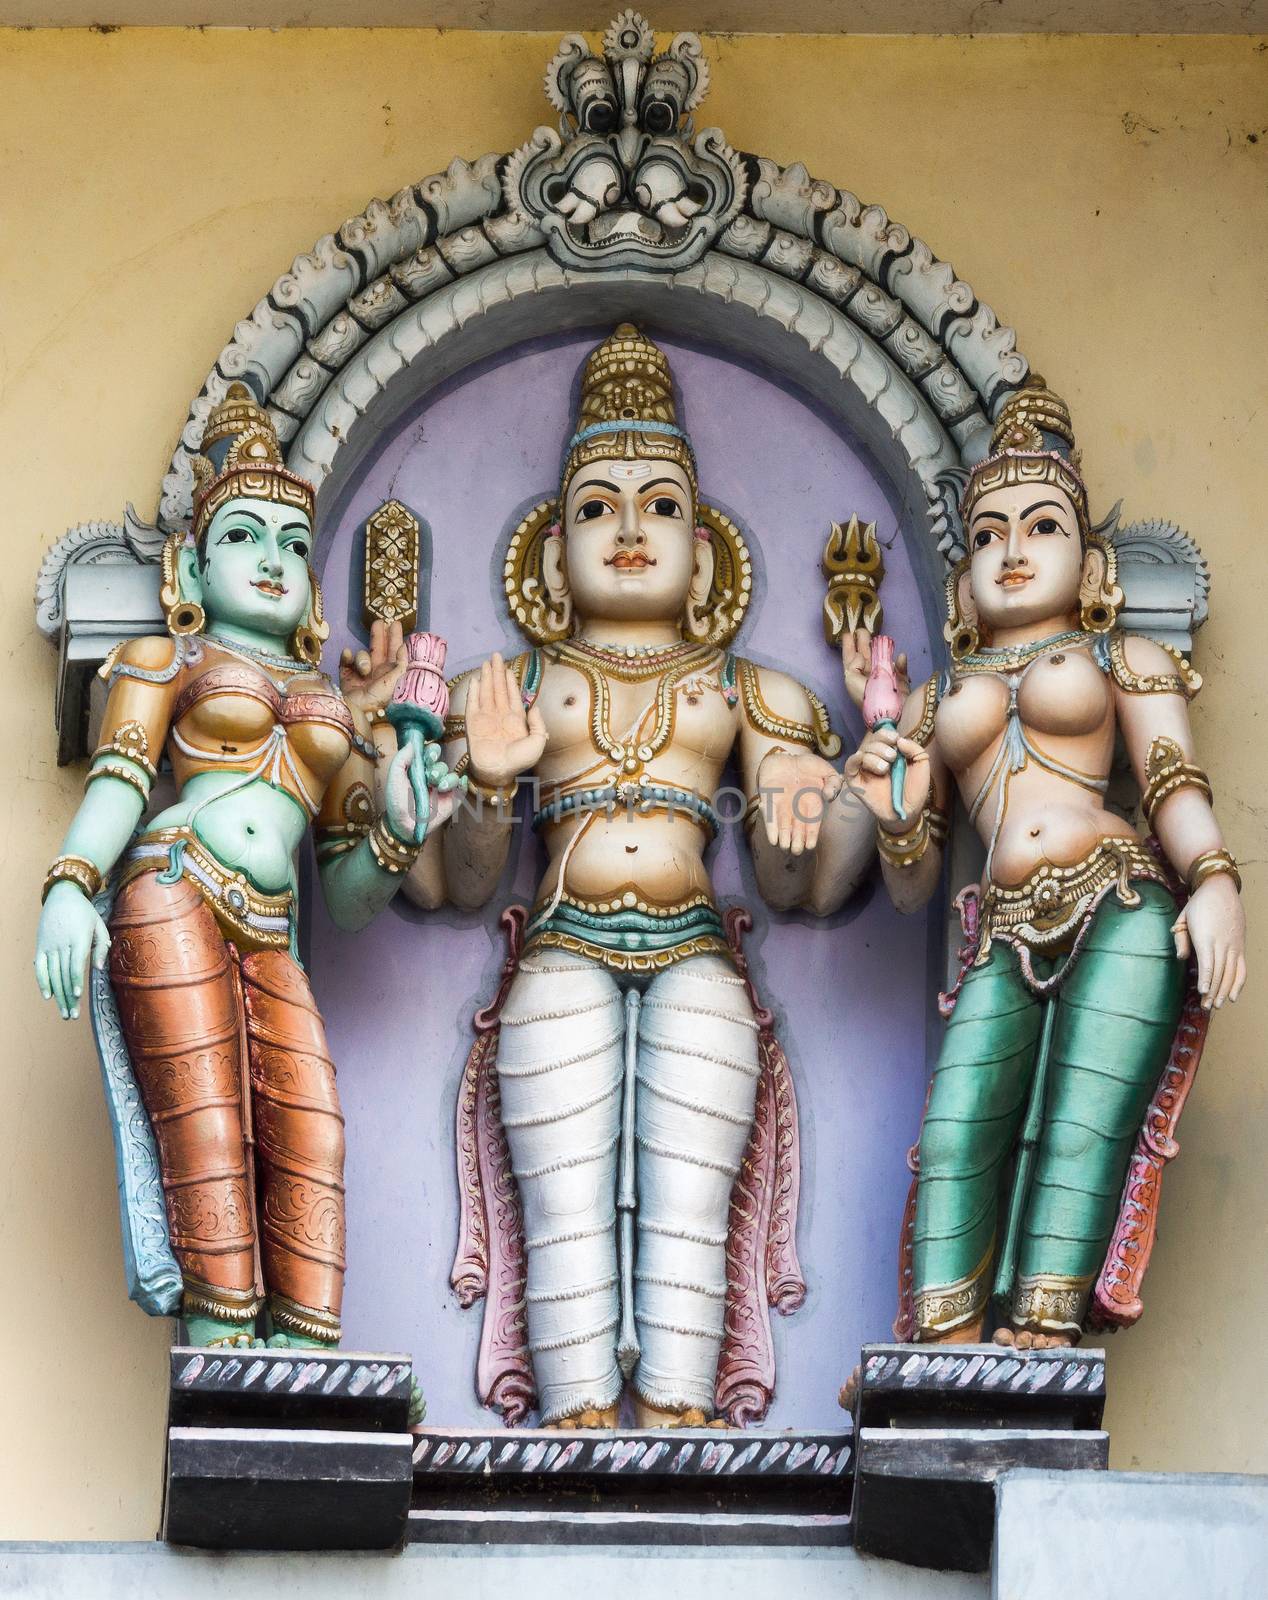 Lord Murugan and his two wives, Valli and Deivayanai. by Claudine